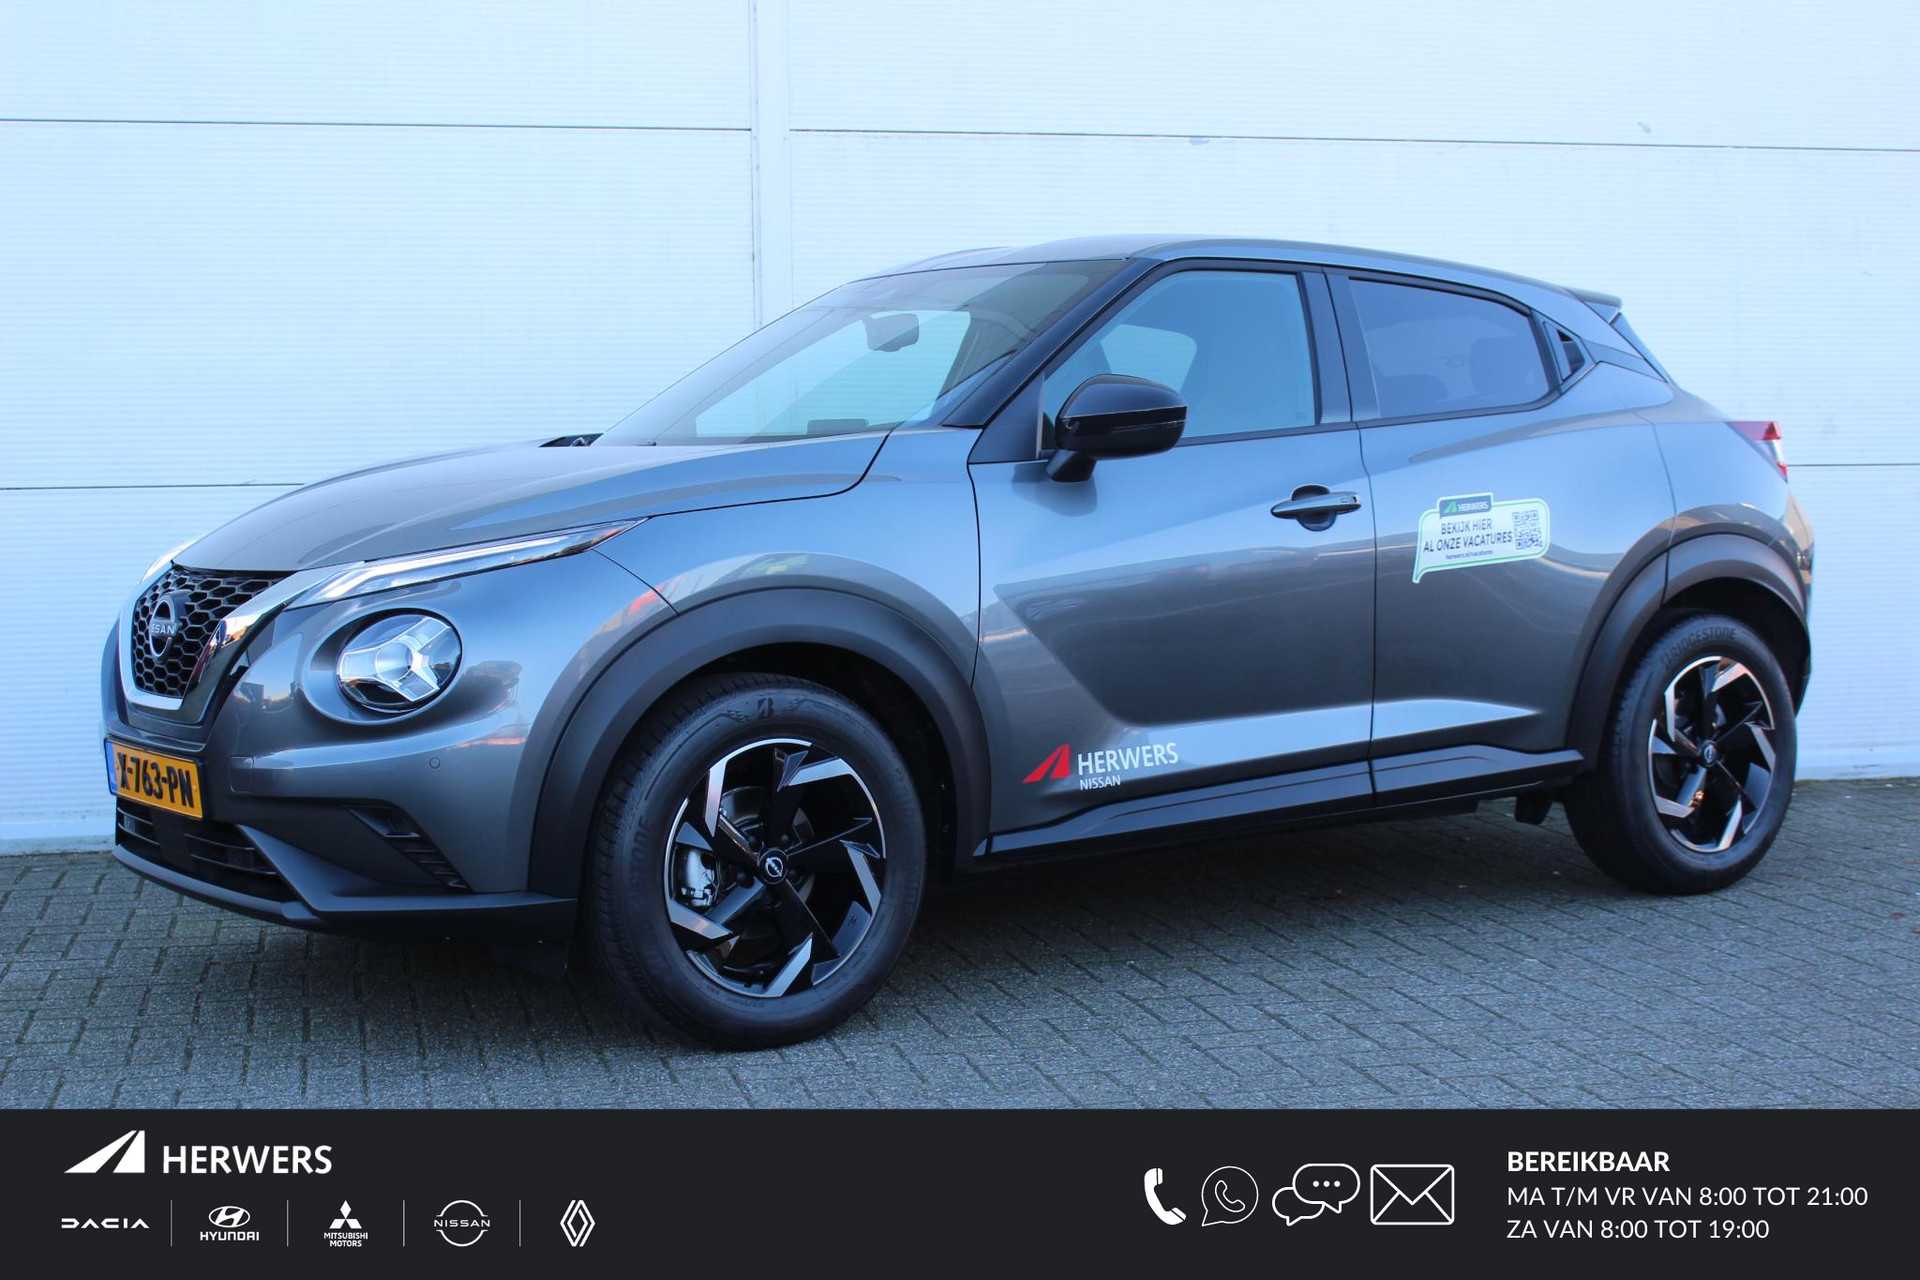 Nissan Juke 1.0 DIG-T 114 N-Connecta / Apple Carplay/Android Auto / Climate Control / Cruise Control / Achteruitrijcamera / Keyless Entry & Start /